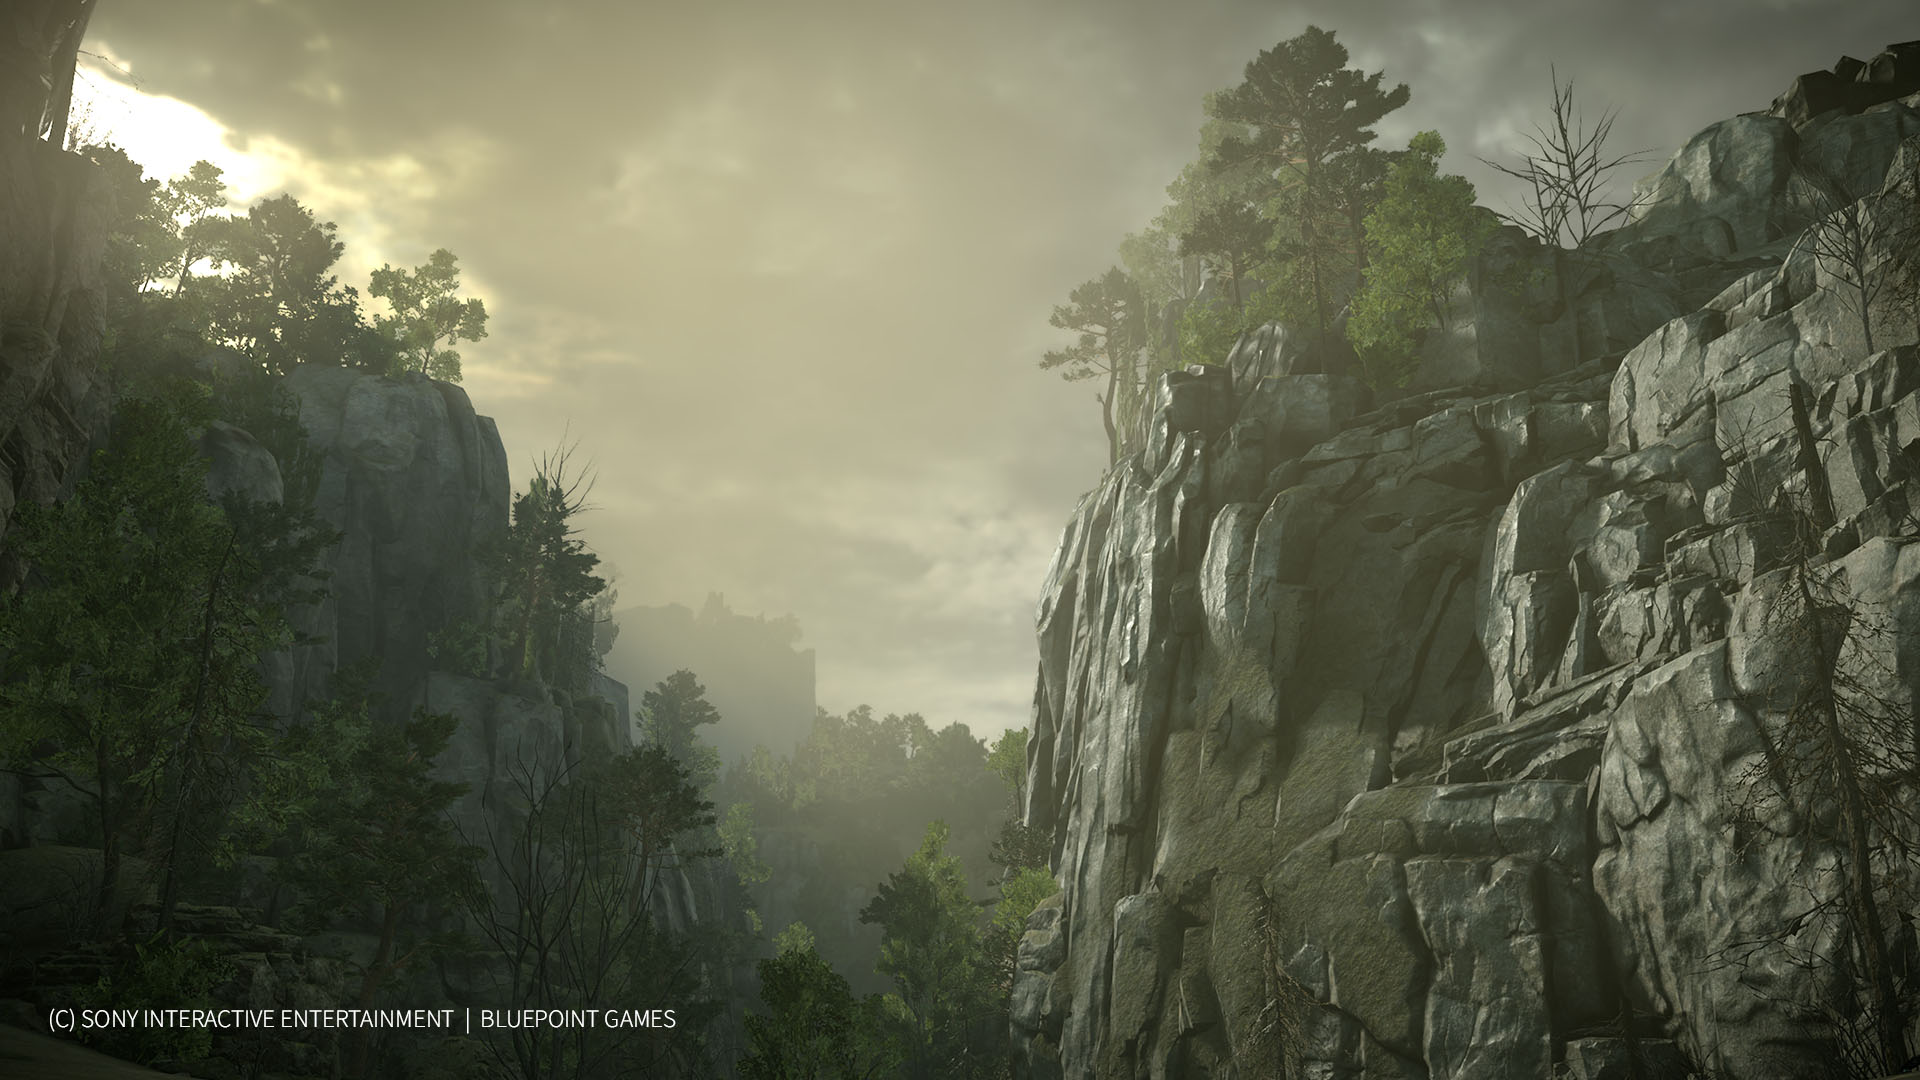 Reimagining Shadow of the Colossus with Quixel Megascans – Megascans